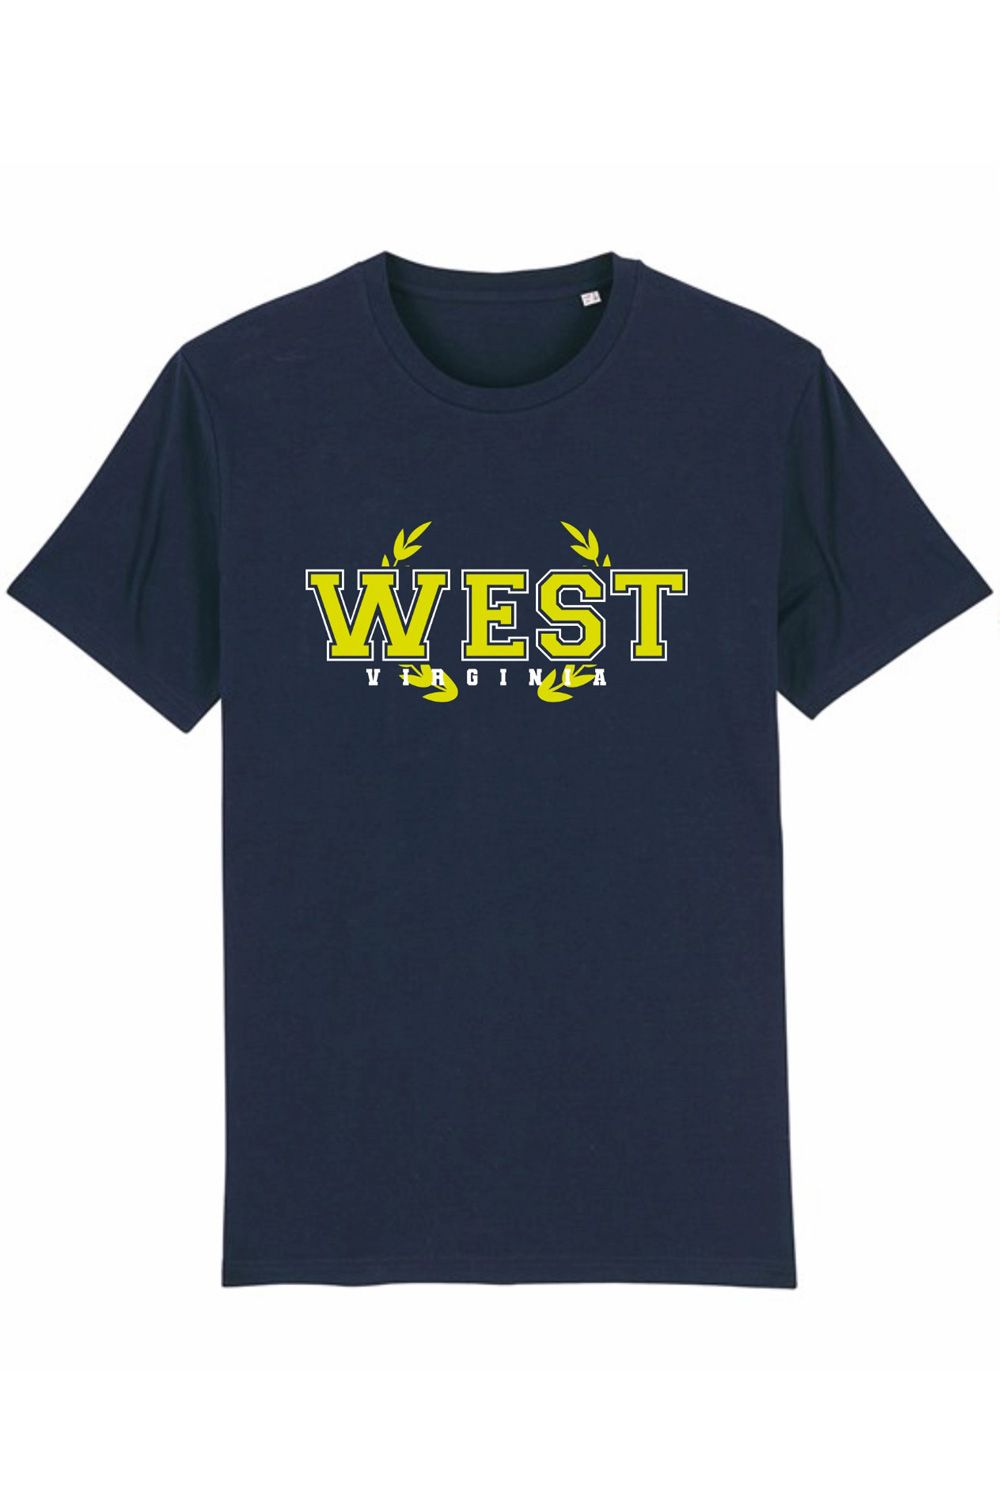 West Virginia Print Oversized T-Shirt (Pack of 6)